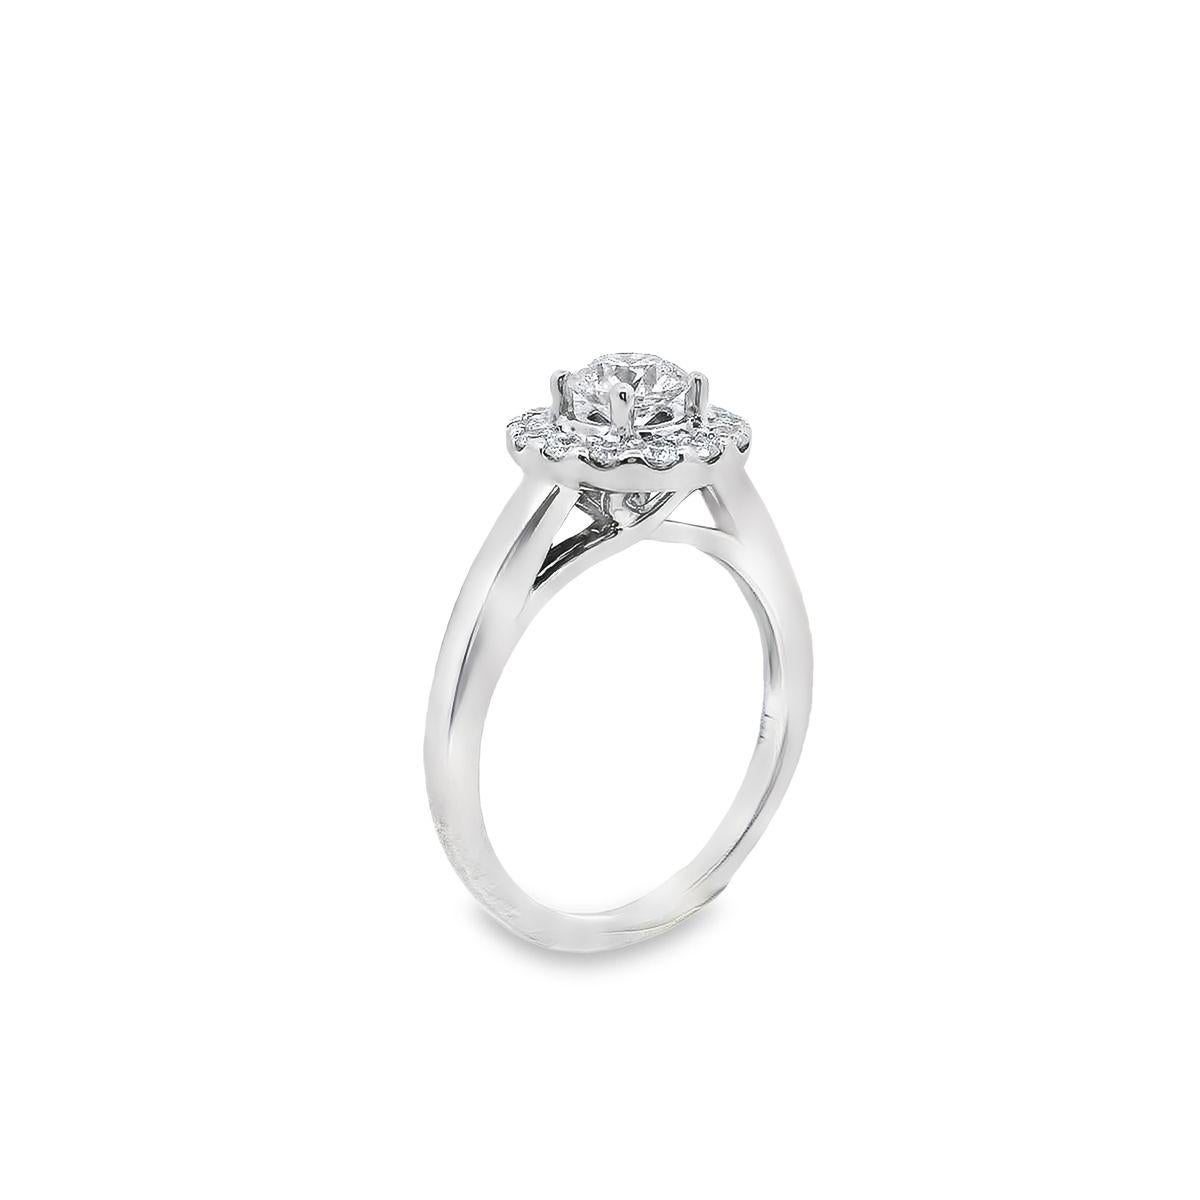 Simply romantic diamond engagement ring offered by Alex & Co. This 14 karat white gold and diamond ring features a dazzling prong set round  Ideal Cut center stone weighing .47ct., with a color grade of  near colorless (I) and S. The diamond is